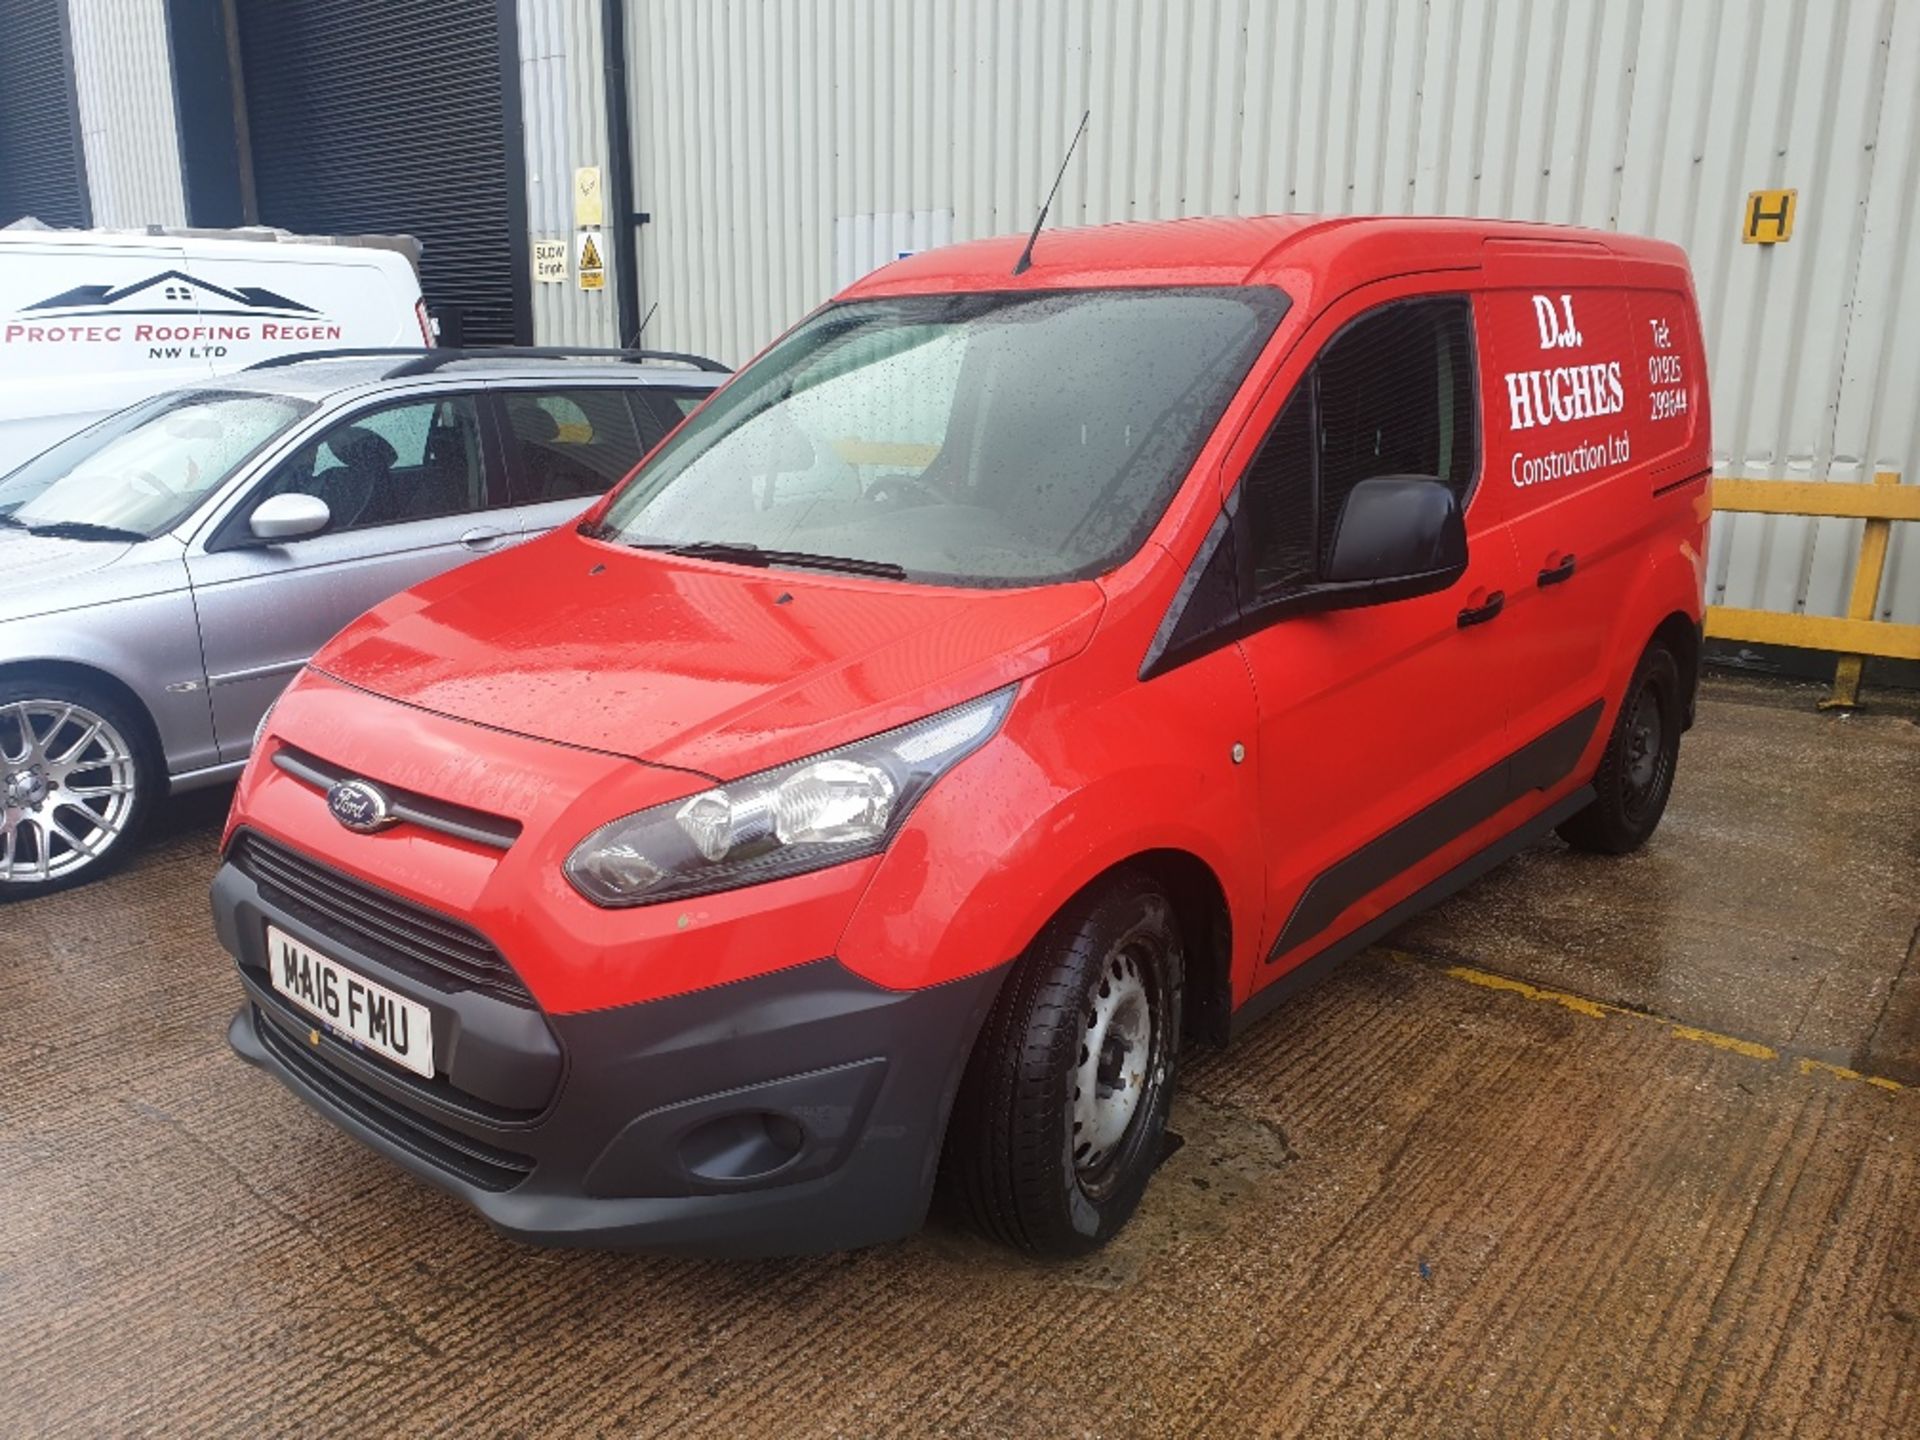 RED FORD TRANSIT CONNECT 200. ( DIESEL ) Reg : MA16 FMU, Mileage : 60,666 Details: WITH 2 KEYS, - Image 4 of 7